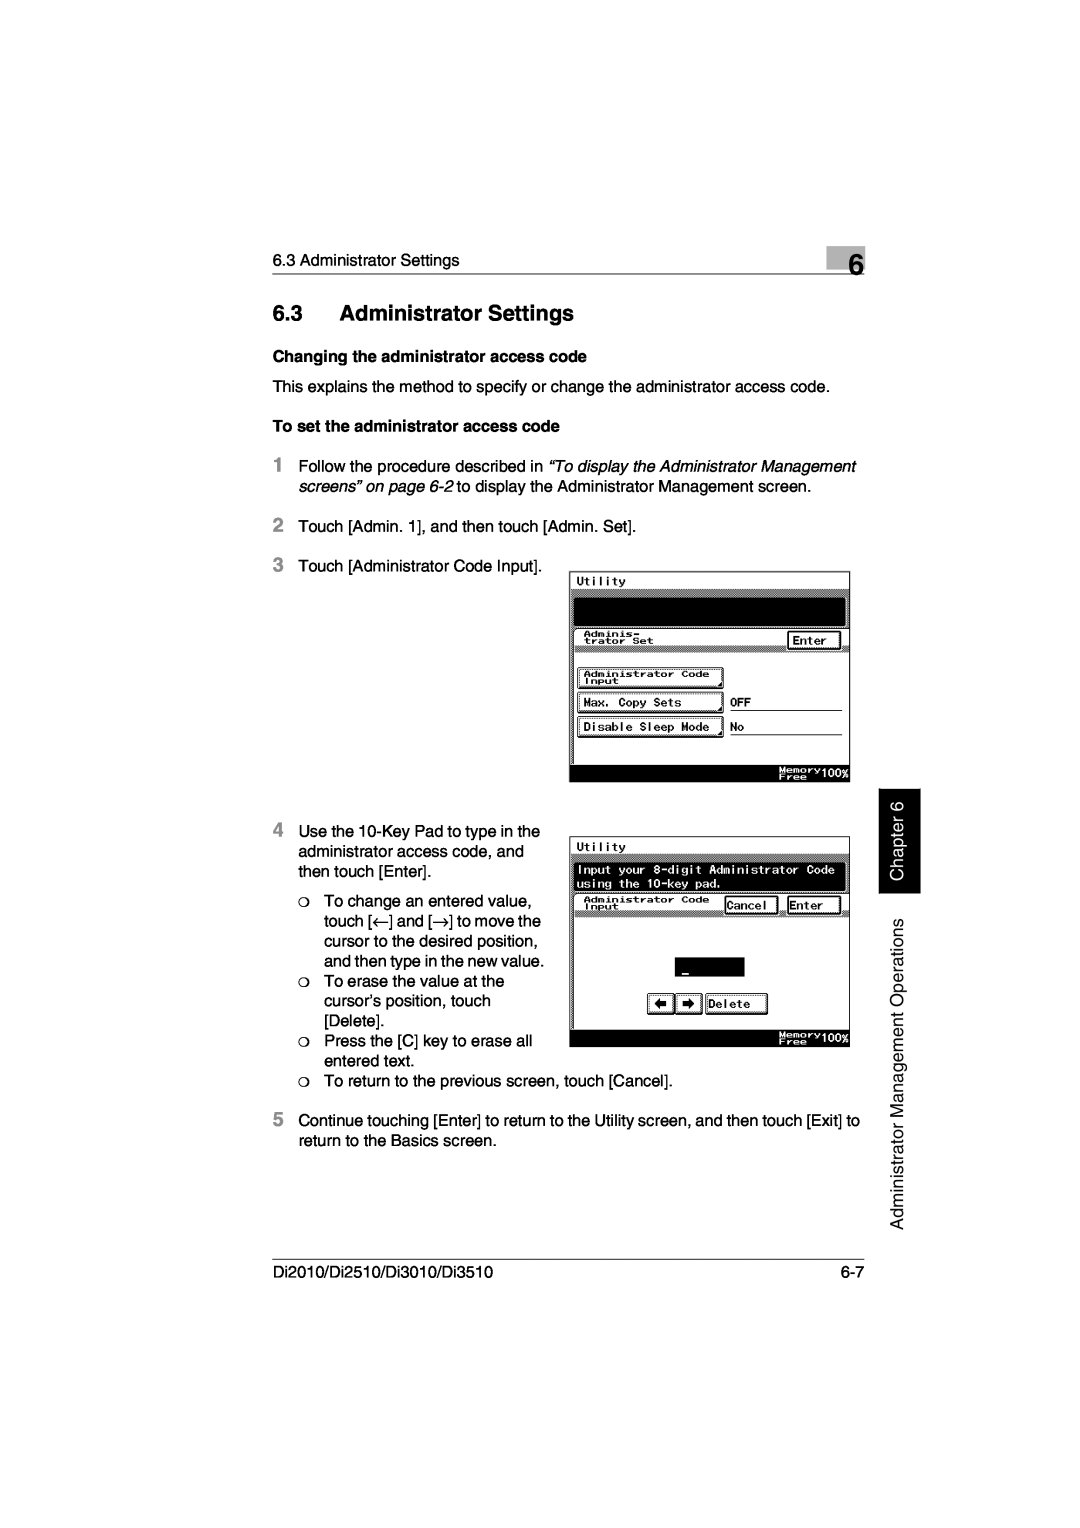 Minolta DI2510 Administrator Settings, Administrator Management Operations Chapter, Changing the administrator access code 